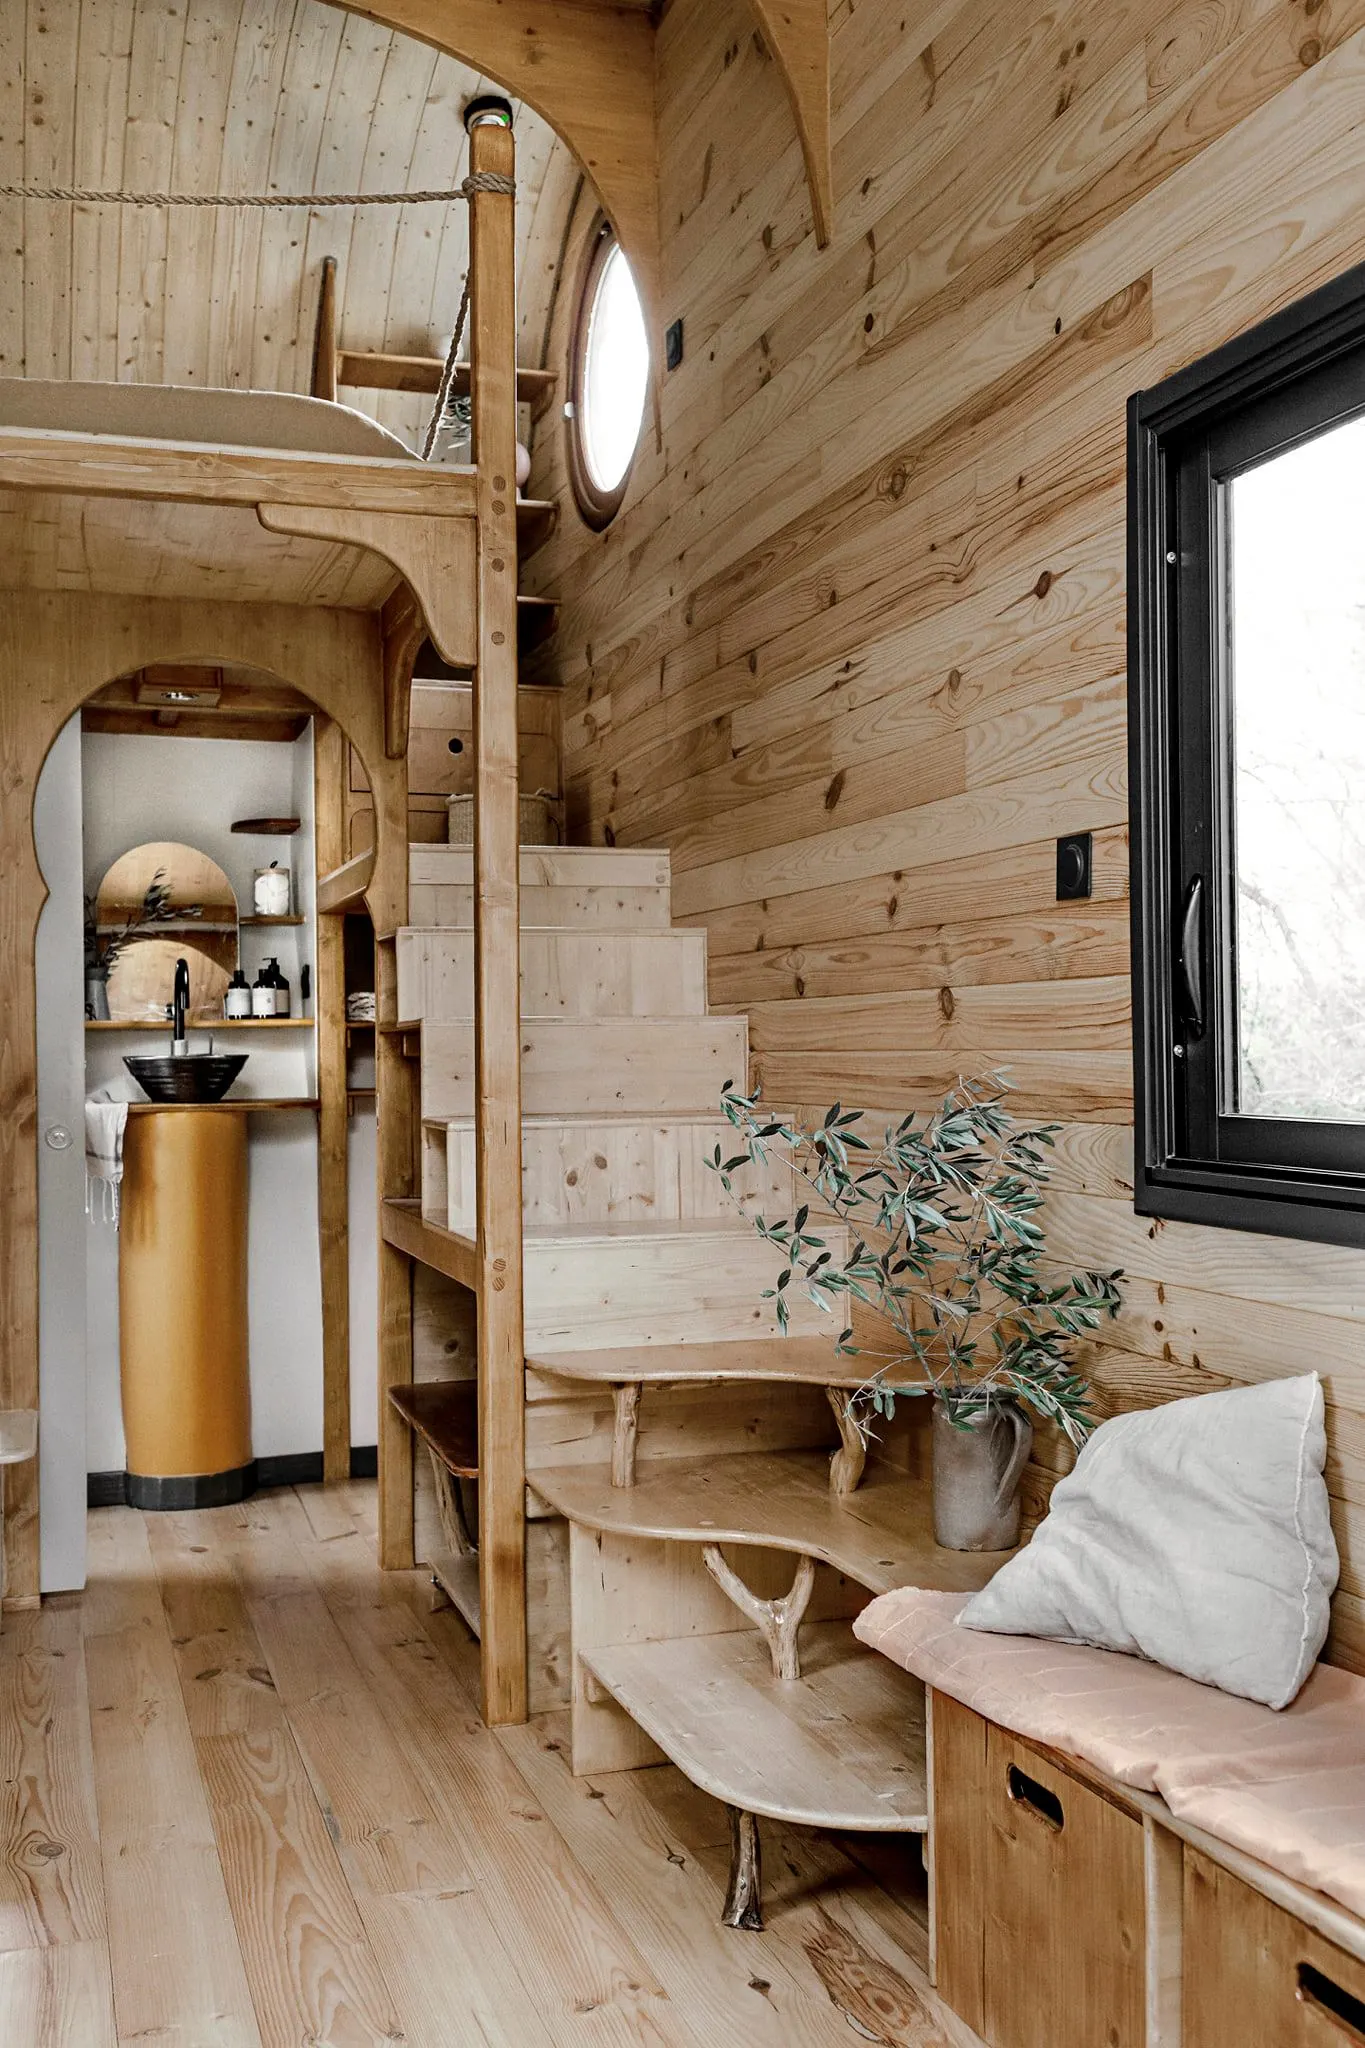 Stairs to Bedroom Loft - P'tit Nid Mobile Tiny House